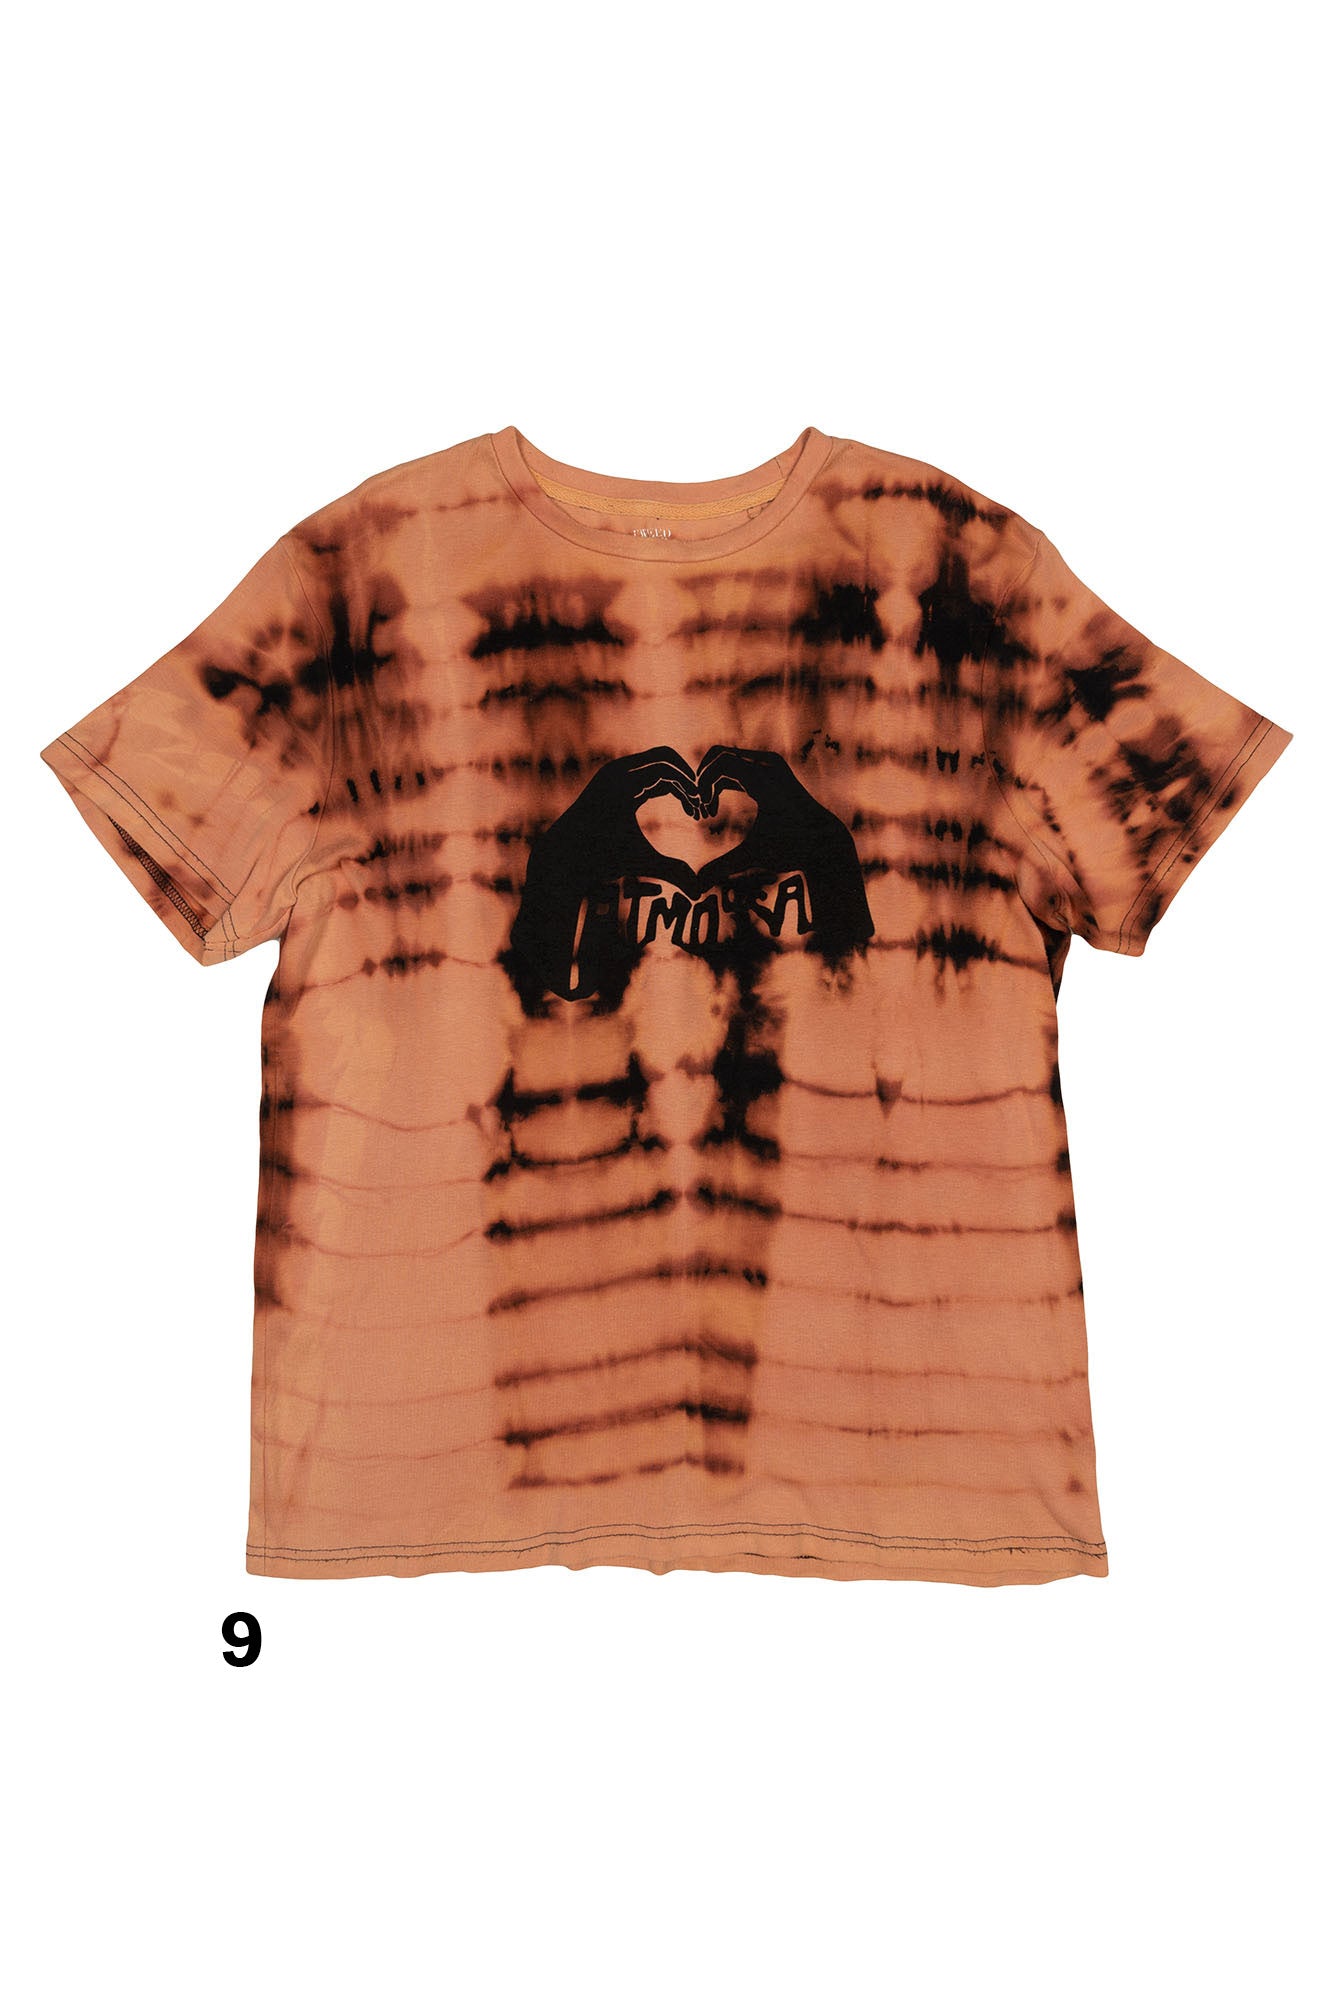 Atmosea Vintage Artist Tee -Heart- made with love by Madi Farrelly - Atmosea